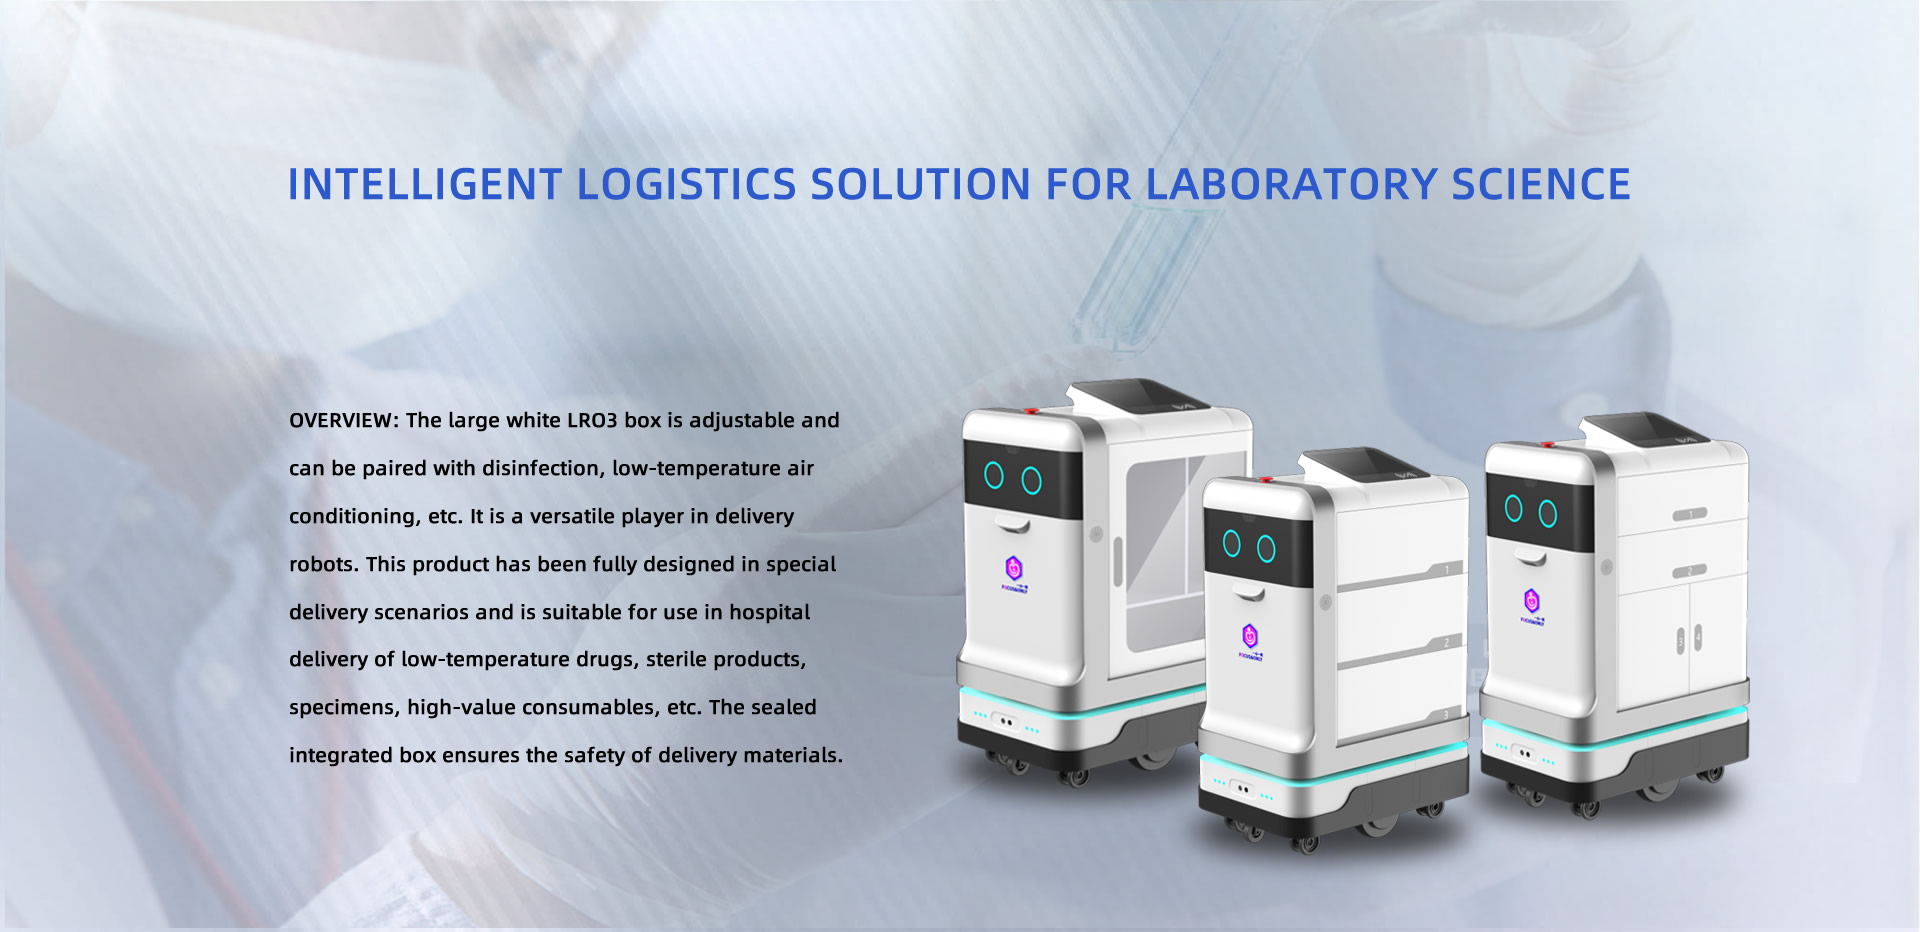 INTELLIGENT LOGISTICS SOLUTION FOR LABORATORY SCIENCE. OVERVIEW: The large white LRO3 box is adjustable and can be paired with disinfection, low-temperature air conditioning, etc. It is a versatile player in delivery robots. This product has been fully designed in special delivery scenarios and is suitable for use in hospital delivery of low-temperature drugs, sterile products, specimens, high-value consumables, etc. The sealed integrated box ensures the safety of delivery materials.